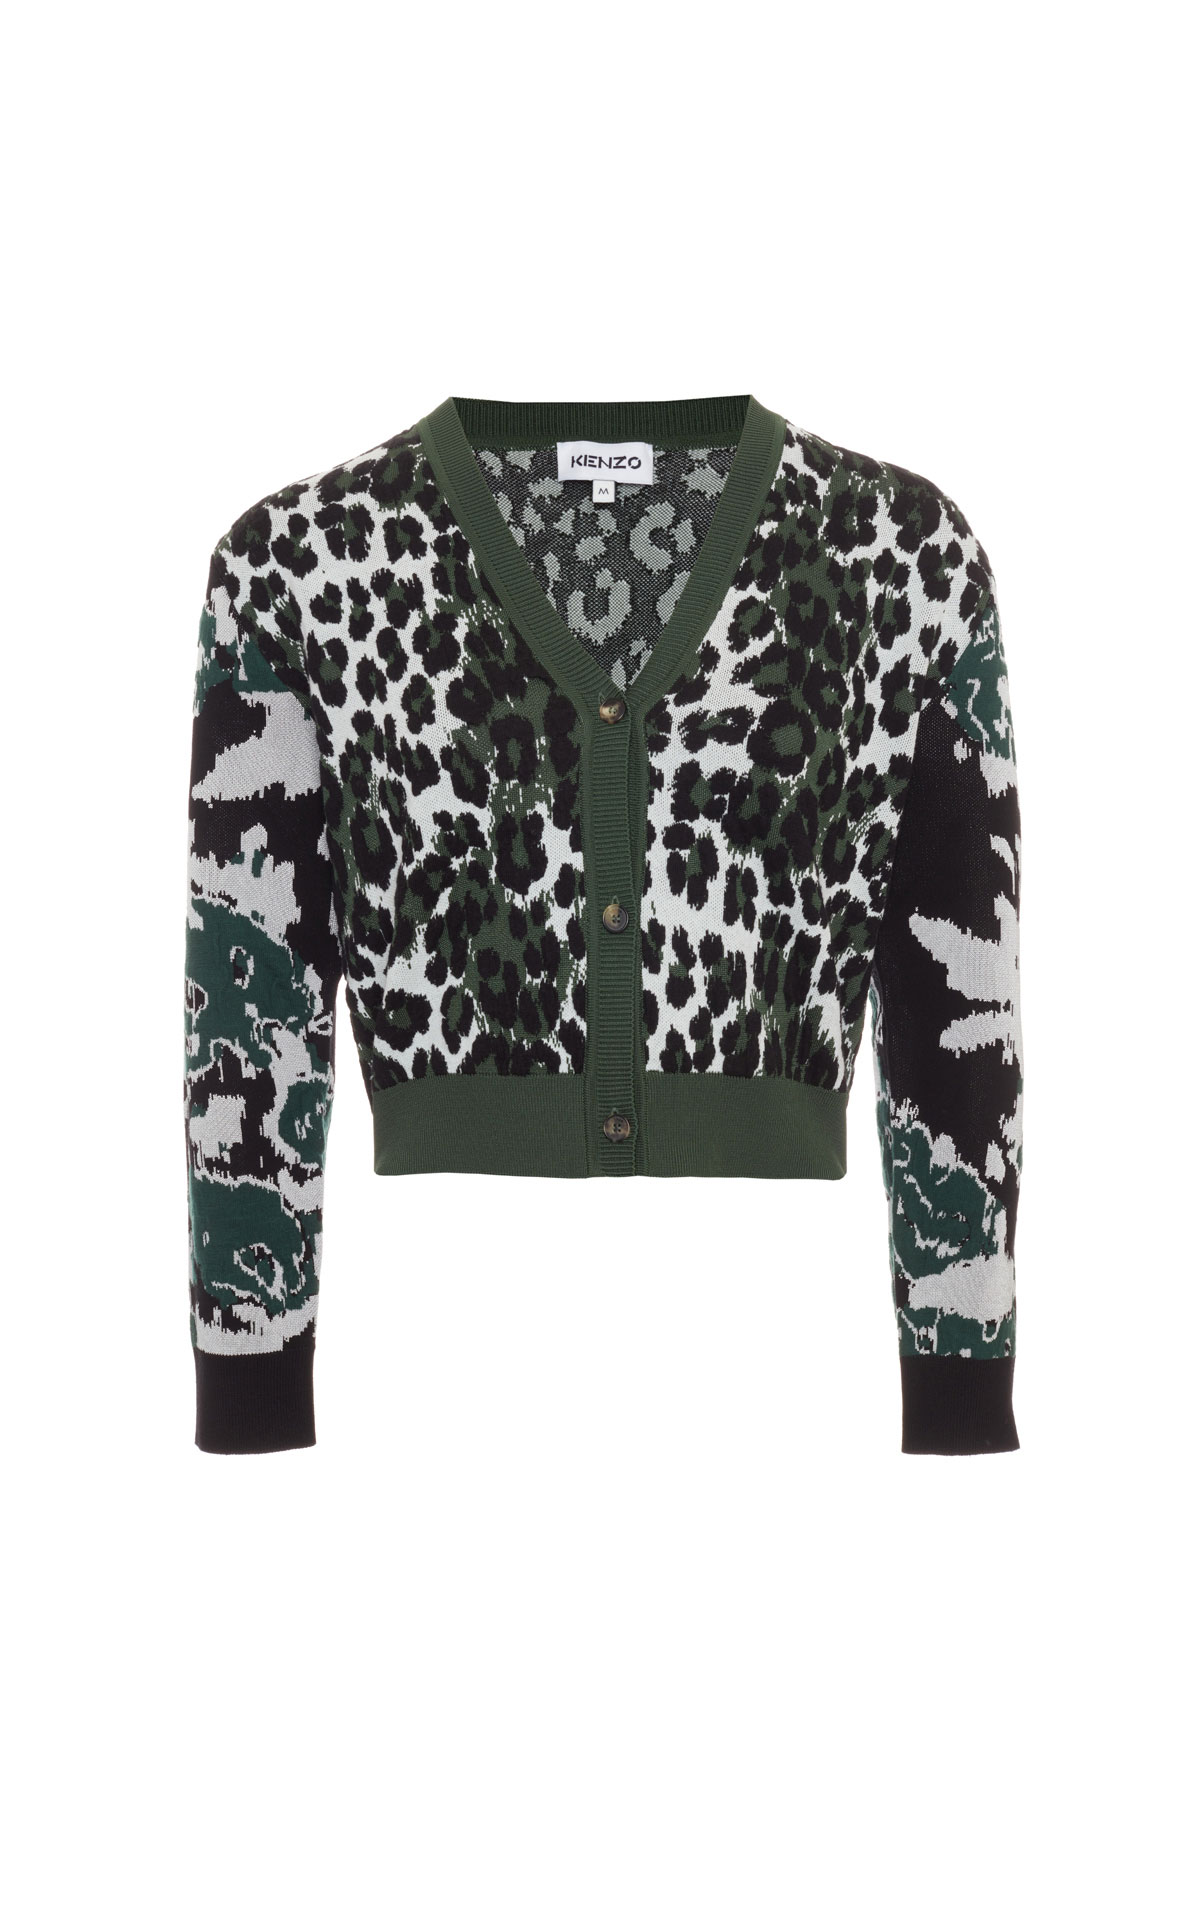 Kenzo Leopard cardigan from Bicester Village